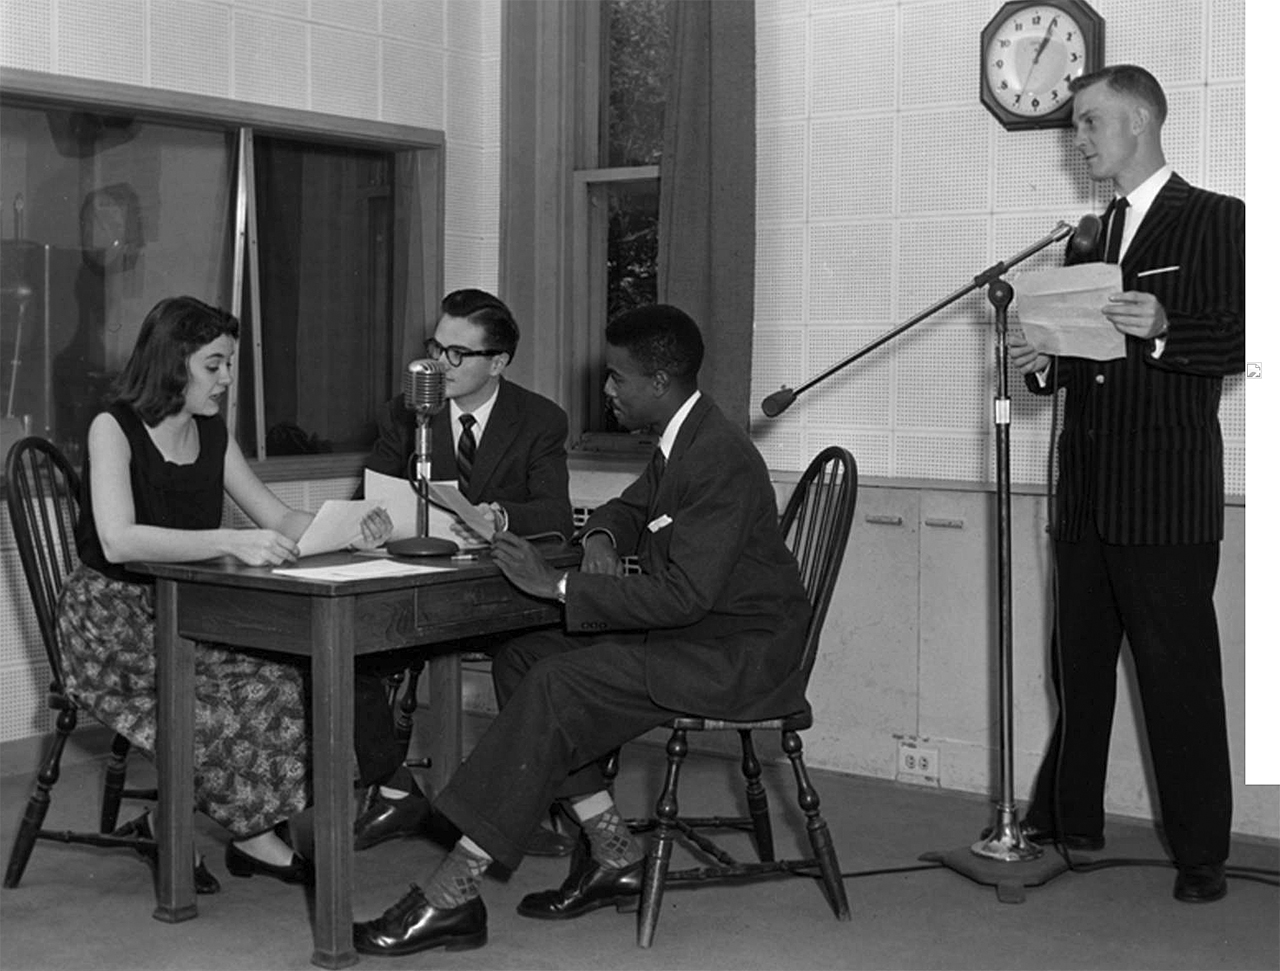 A 1956 broadcast, opposite page, captures the educational programming done from the 1930s into the 1950s. WJBC offered airtime to the ISU station. (Courtesy of the Dr. Jo Ann Rayfield Archives at Illinois State University)